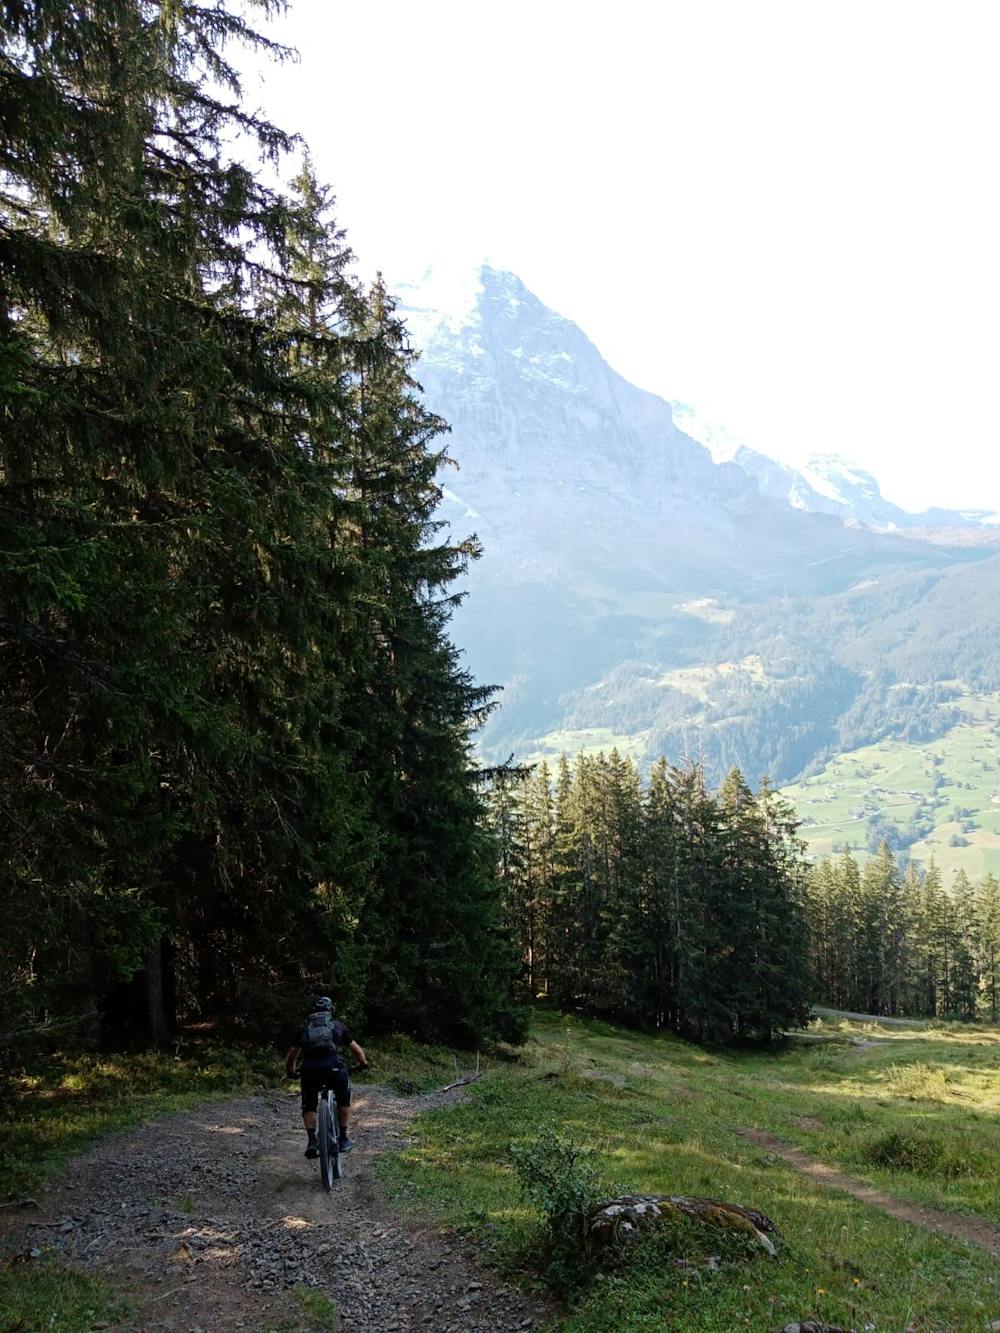 In the trees close to Grindelwald